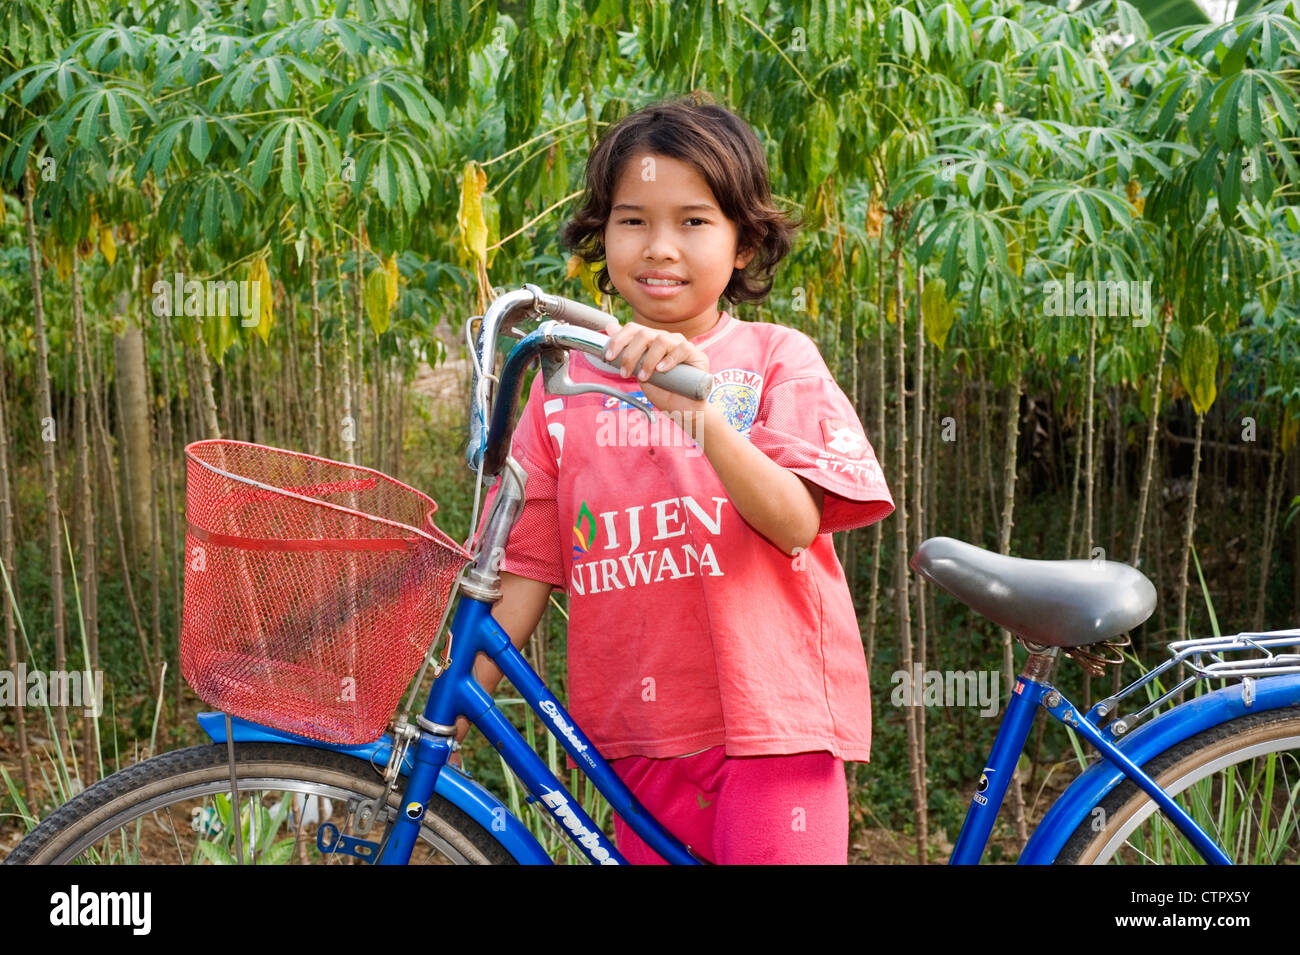 local villager young girl in rural village street with large traditional bicycle Stock Photo